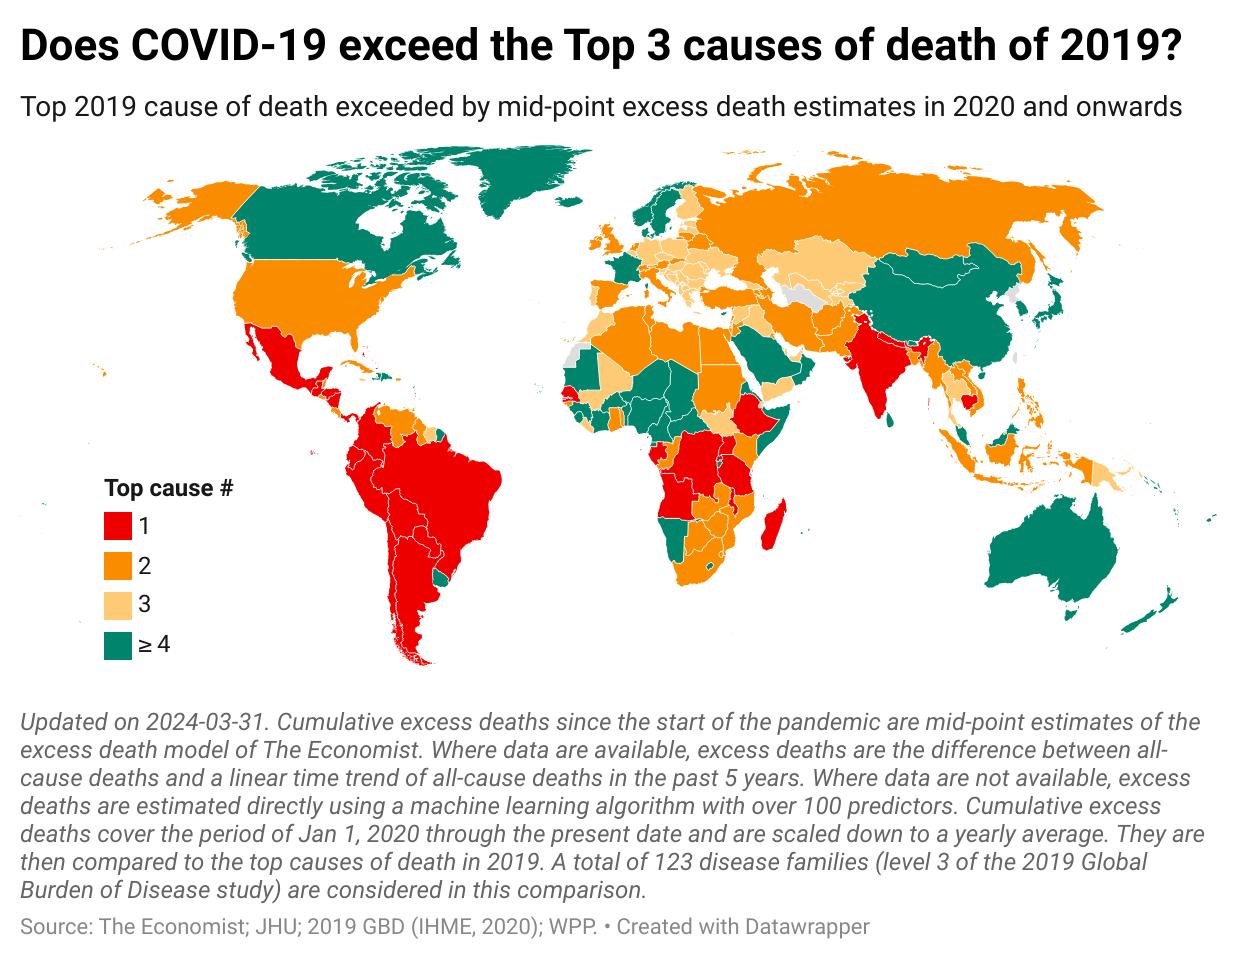 Top causes of death are capped by excess mortality estimates in most countries